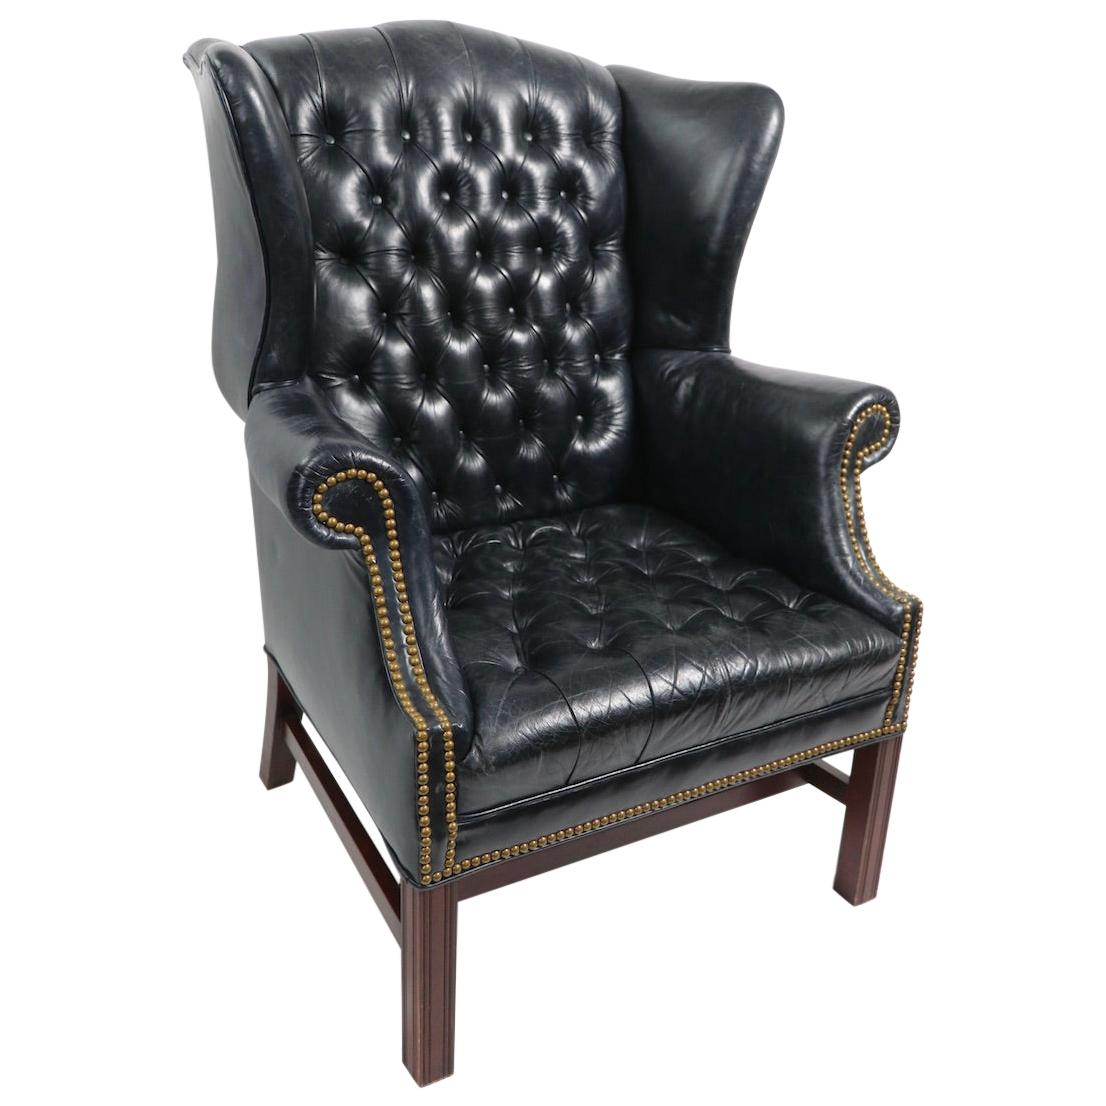 Tufted Leather Chippendale Style Wing Chair